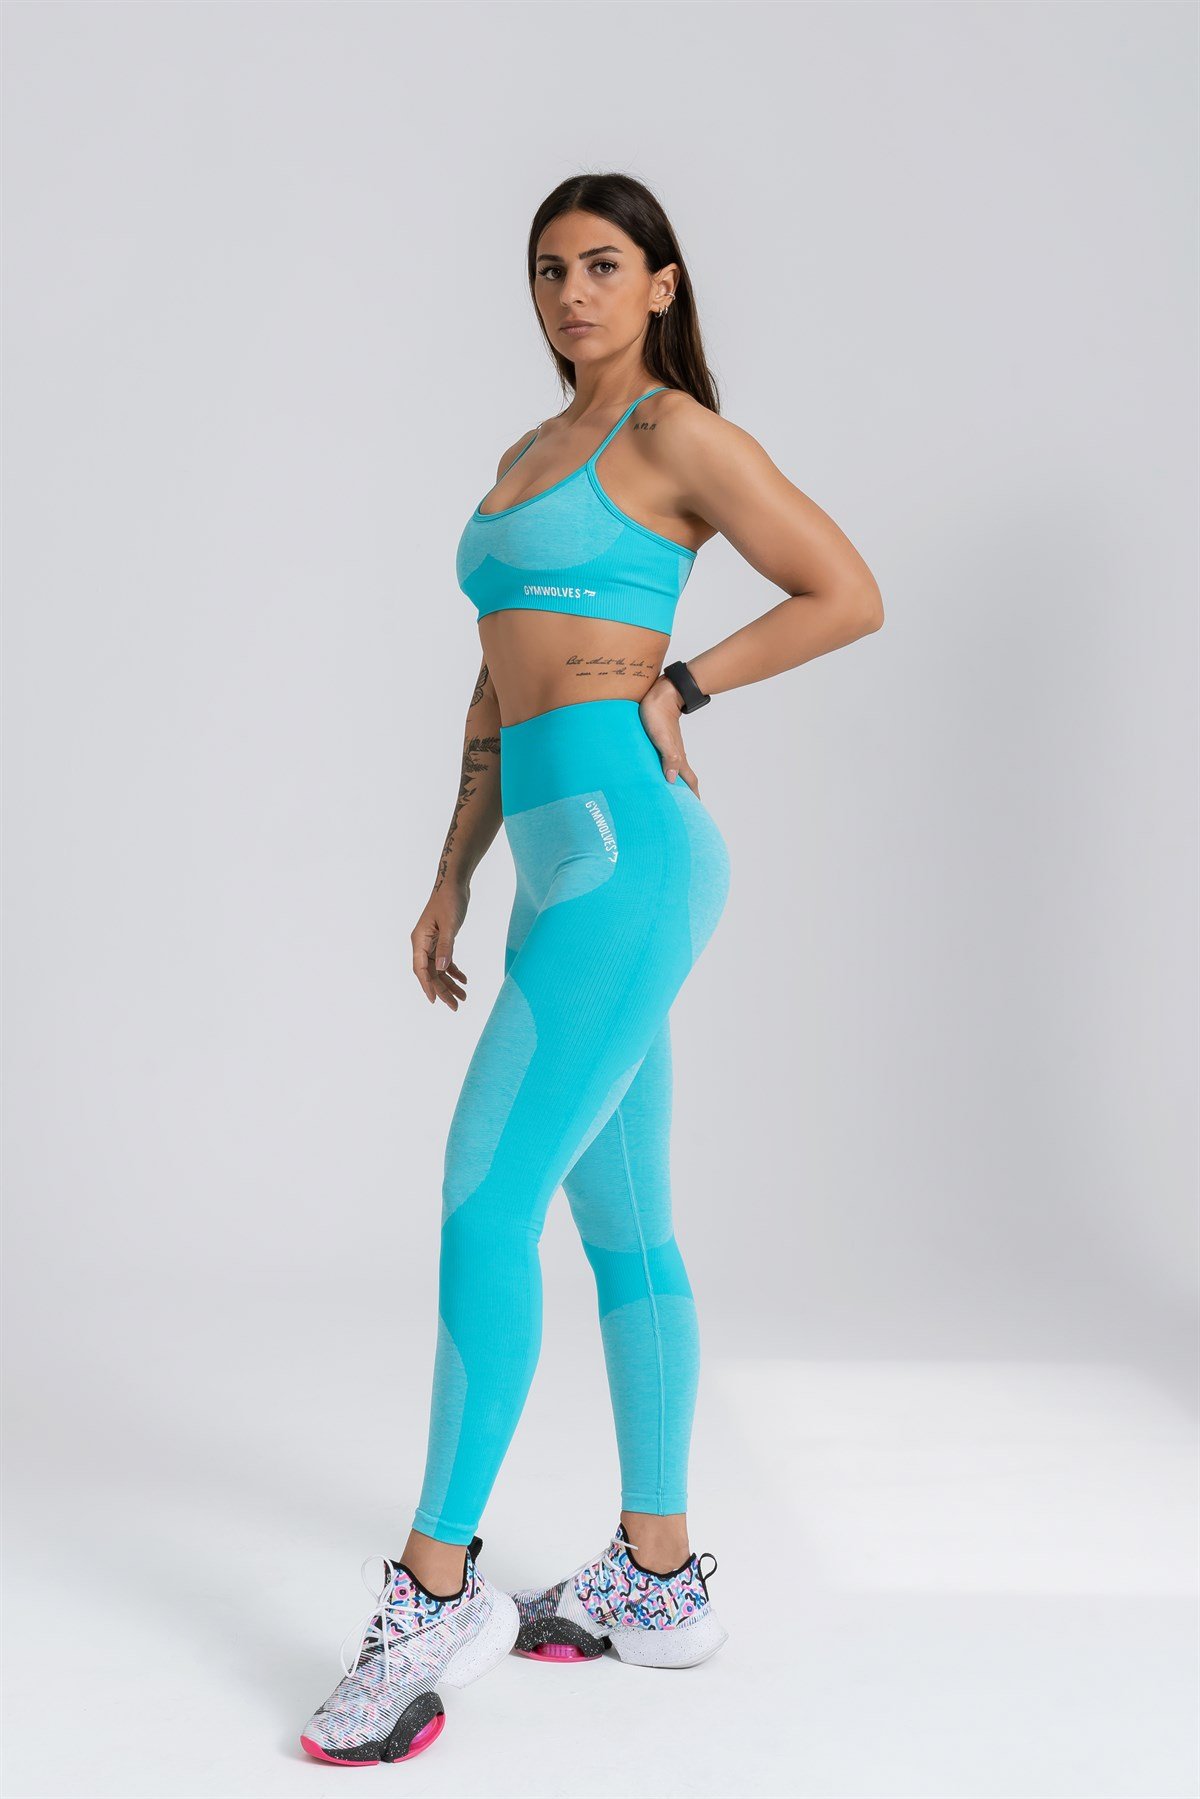 Gymwolves Strong Series Turquoise Seamles Sport Bralet 953